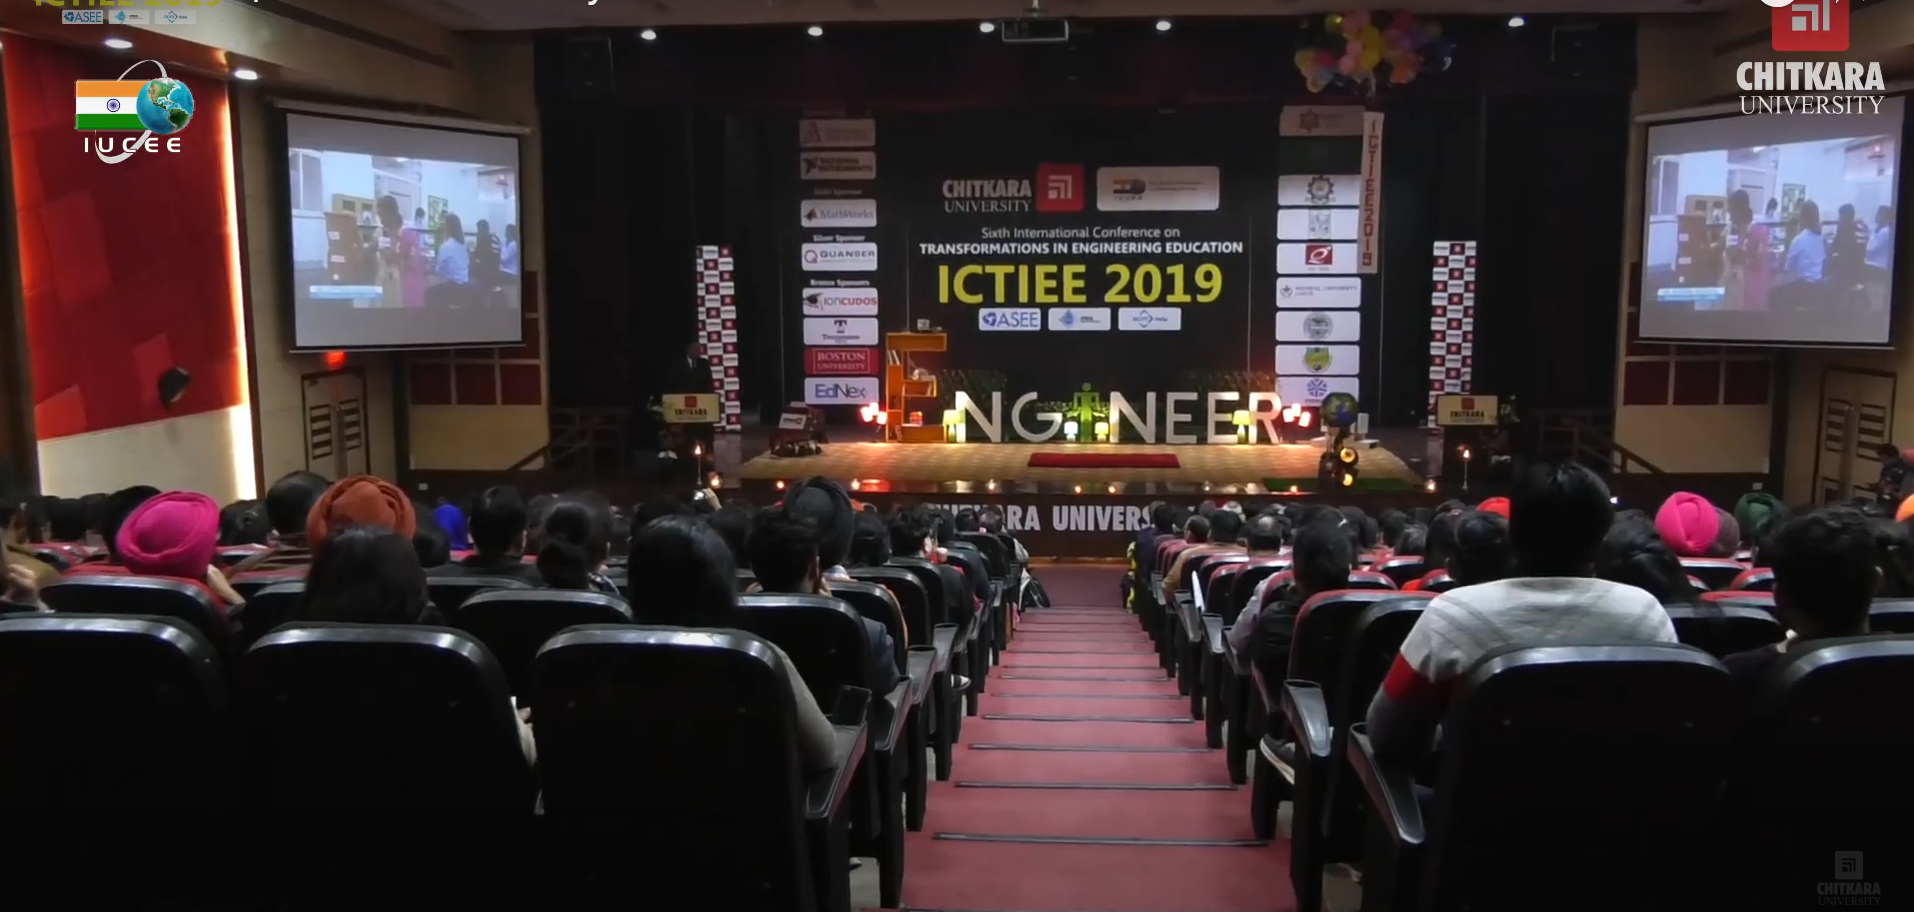 ICTIEE (International Conference on Transformations in Engineering Education):